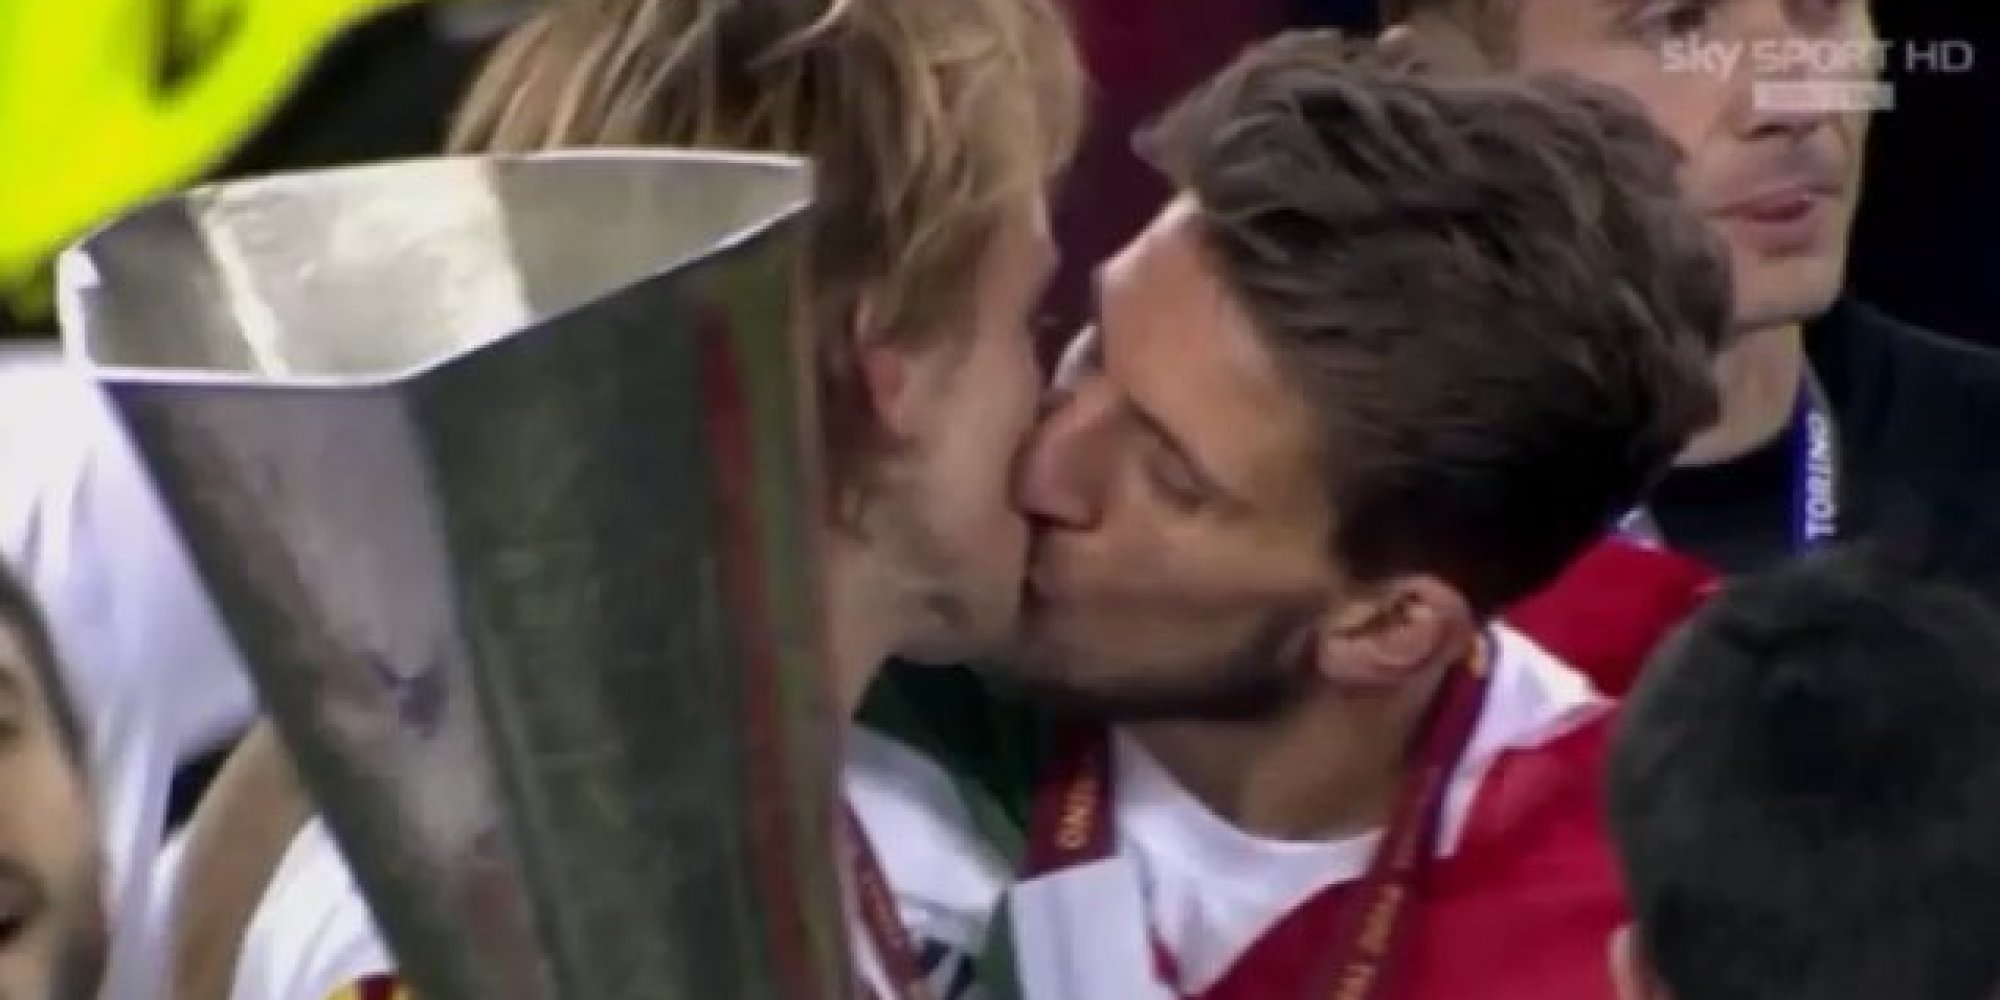 Male Soccer Players Share Kiss After Win And Apparently People Need